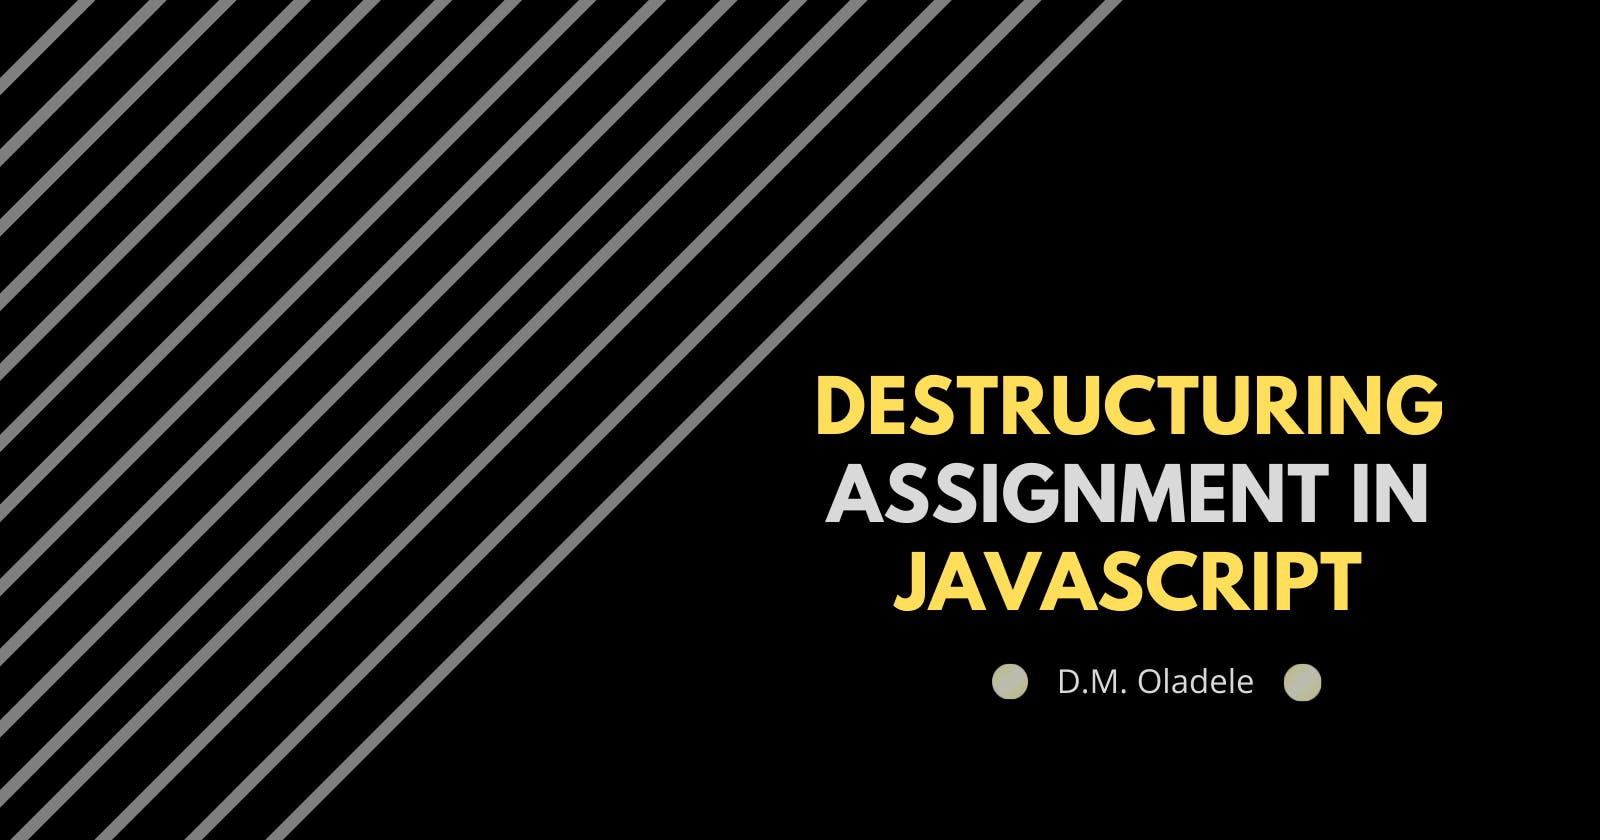 Destructuring assignment in javaScript